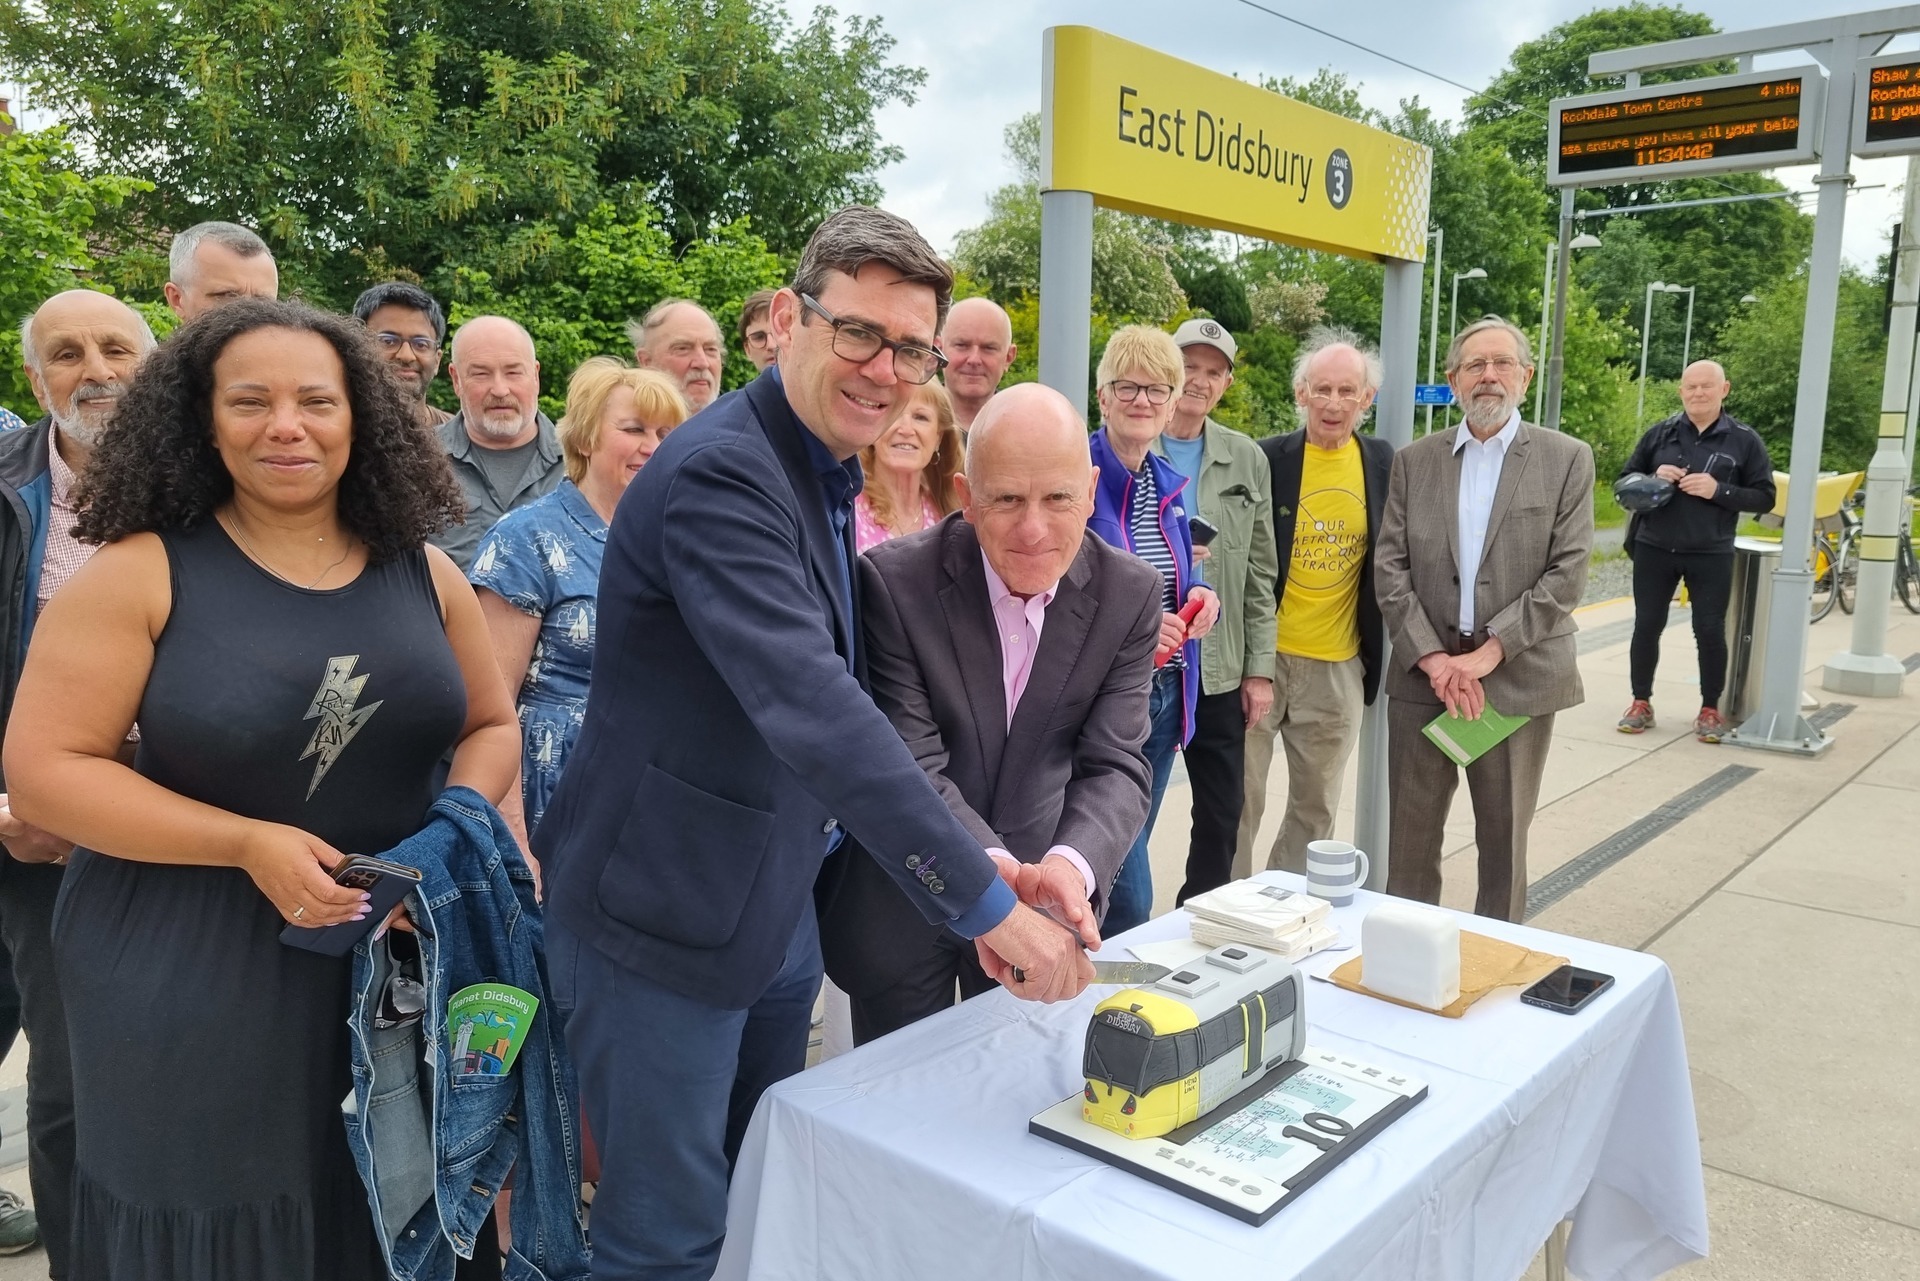 To celebrate 10 years of operation, the Mayor joined local Councillor Andrew Simcock, former chair of the Transport for Greater Manchester Committee, Andrew Fender – who helped bring Metrolink to the city-region during his four-decade spell in local politics – and ex-Didsbury councillor Geoff Bridson at the tram stop, where they handed slices of a Metrolink cake to passengers.